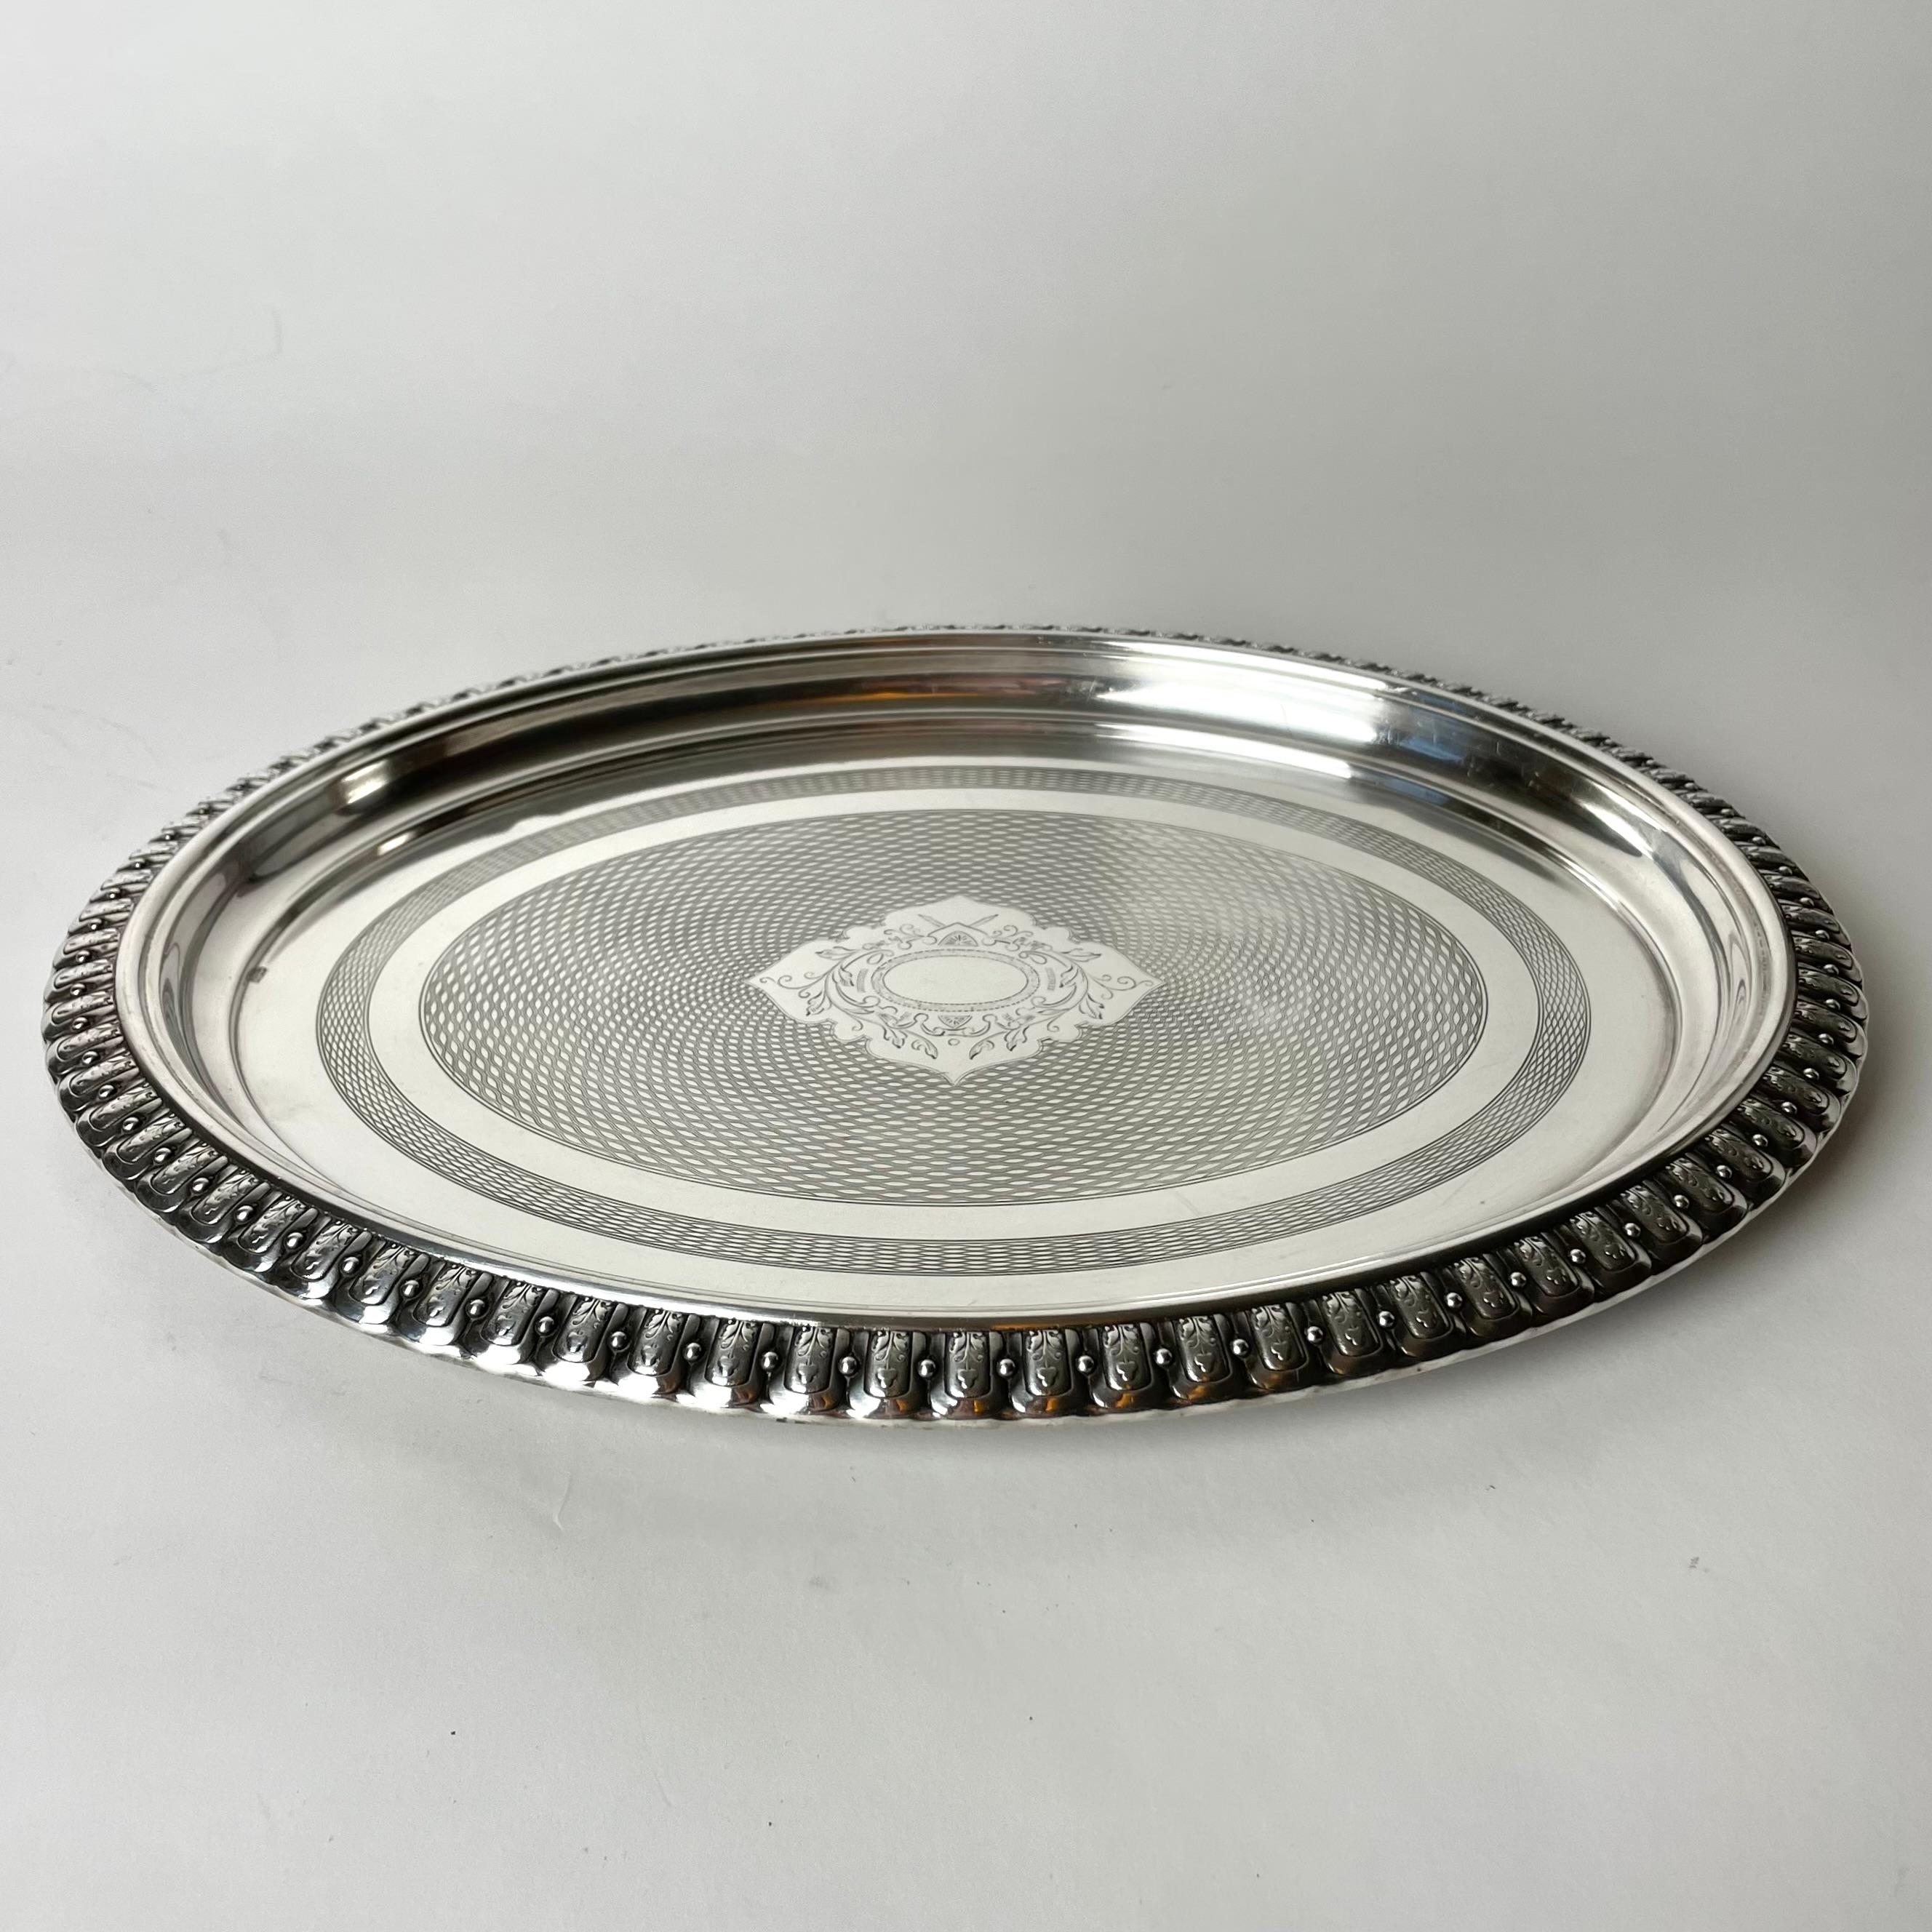 Elegant Silver-Plated Tray made by WMF (Wurttembergische Metallwarenfabrik, Germany) from the late 19th Century. Beautiful decor and high quality.


Wear consistent with age and use 